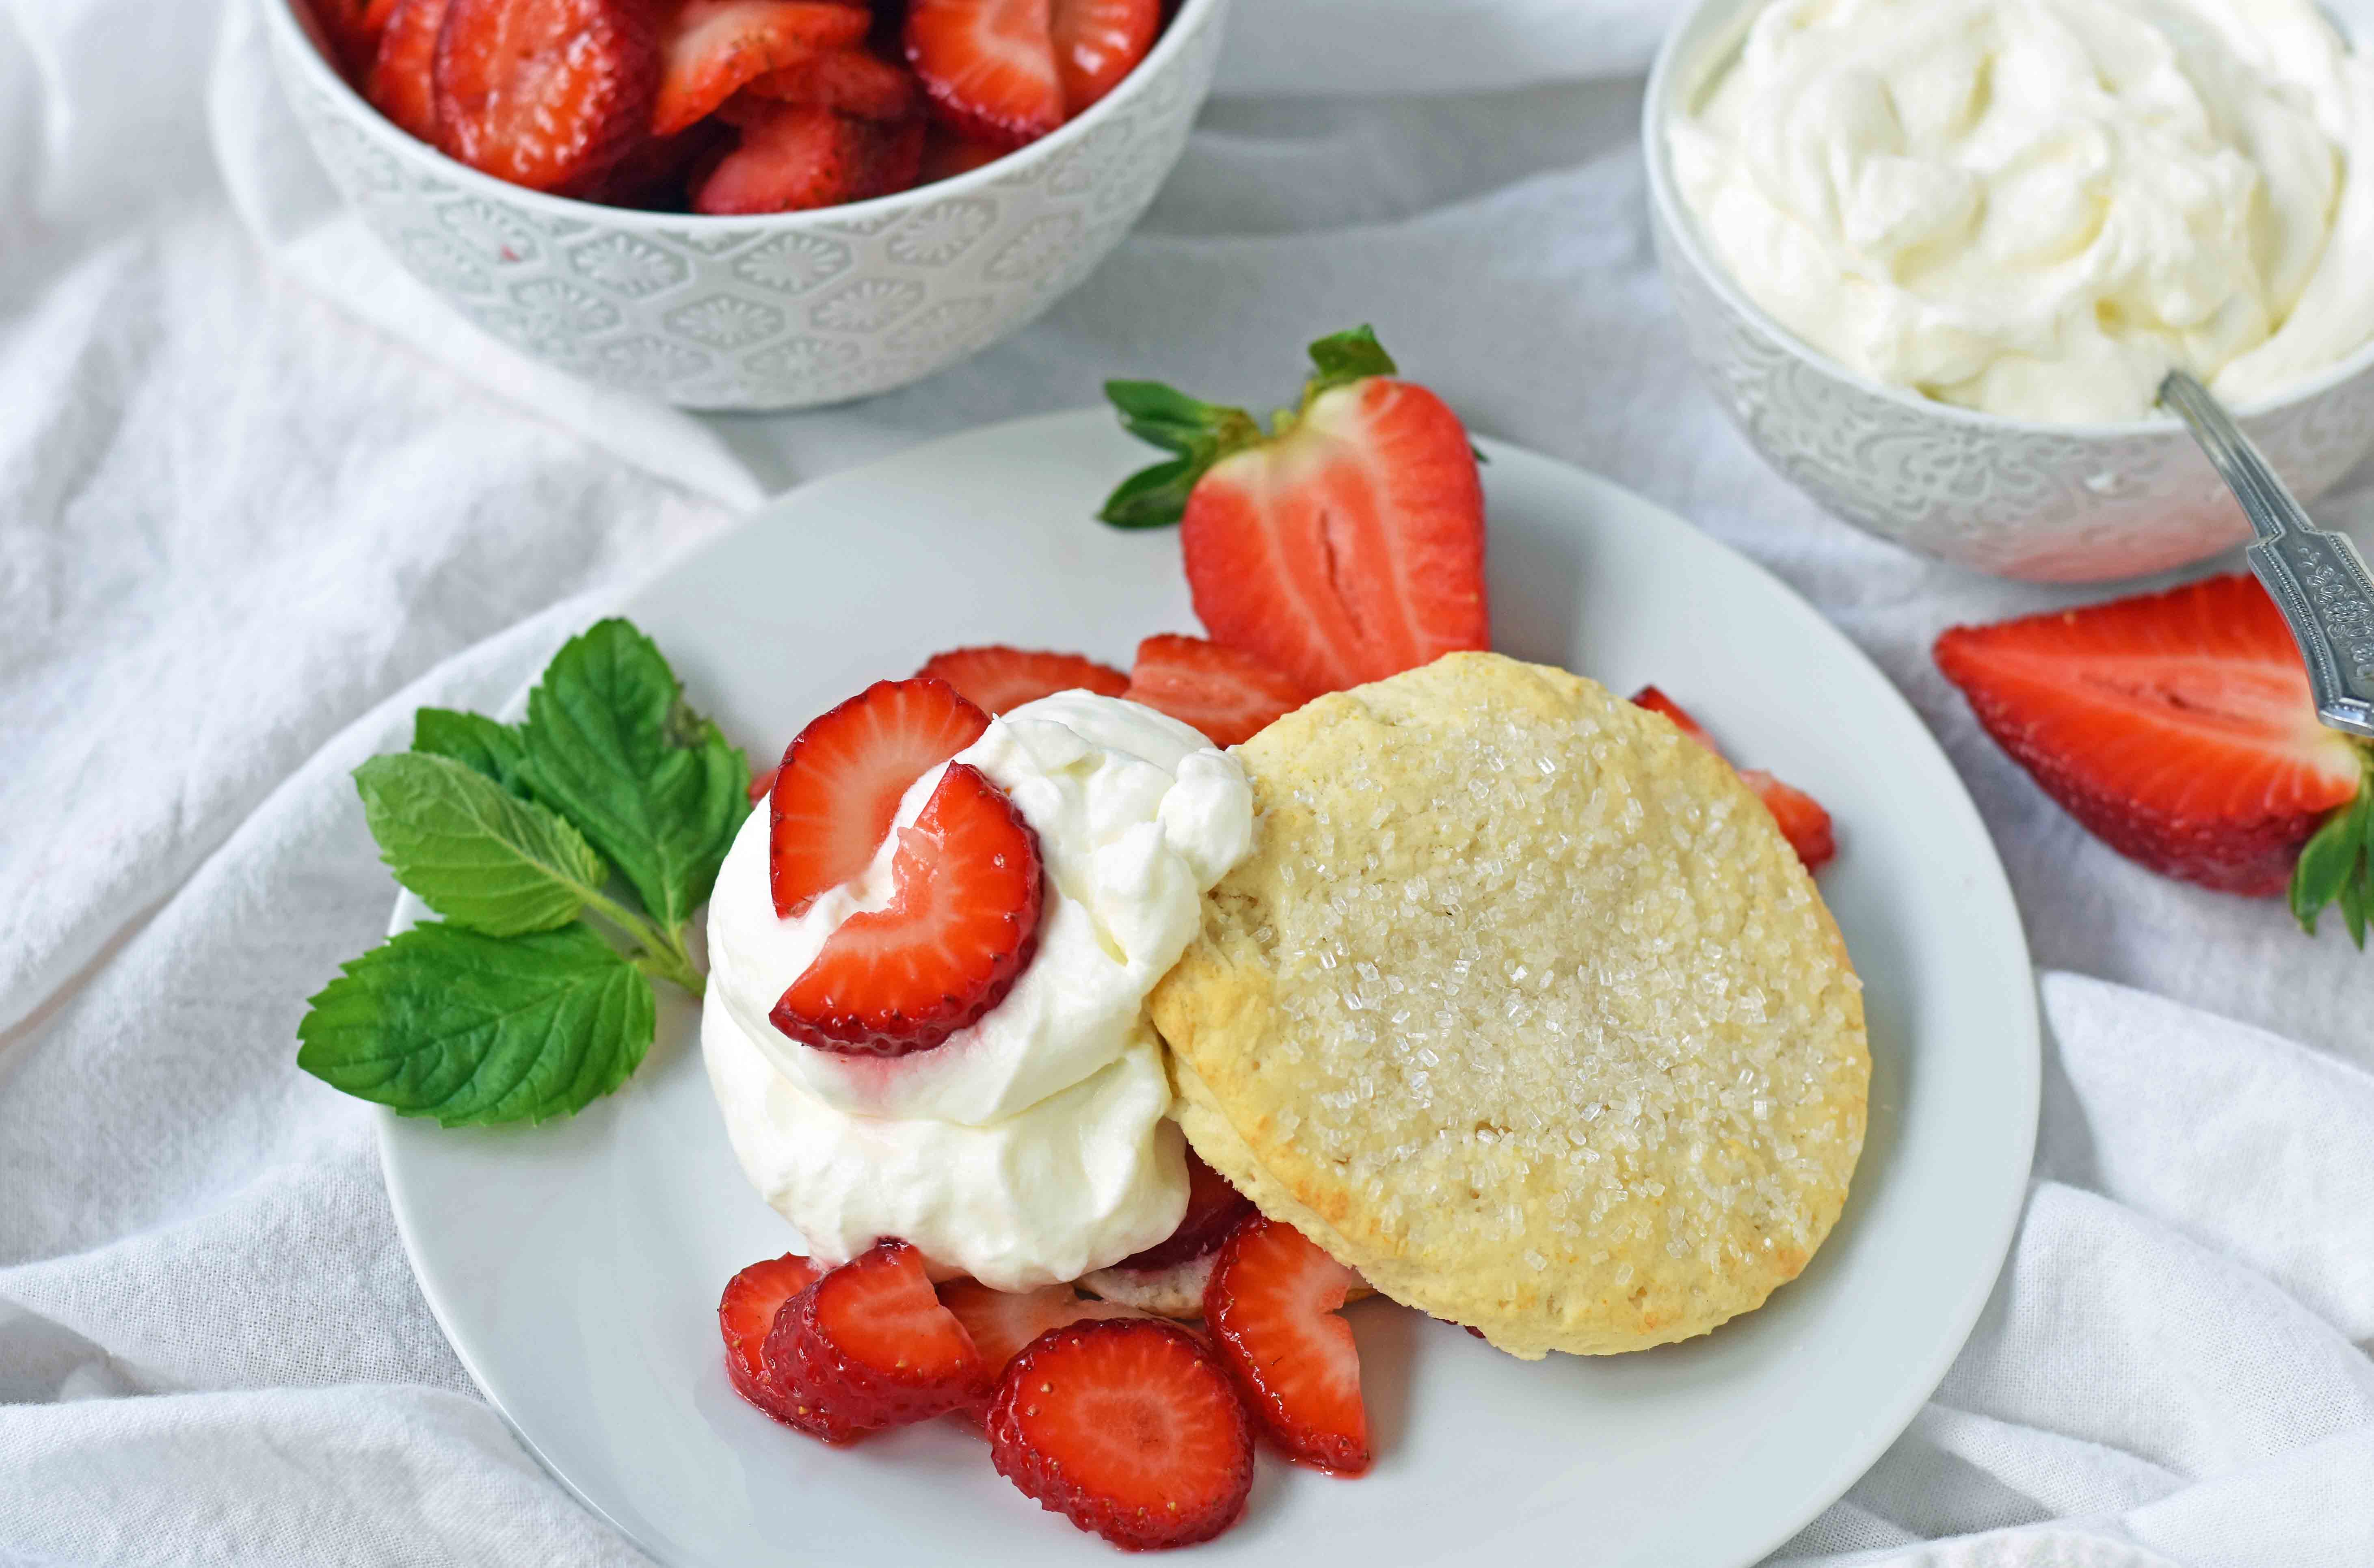 Strawberry Shortcake with Sweet Biscuits, Sugared Strawberries, and Homemade Sweetened Whipped Cream. The BEST Strawberry Shortcake Recipe. A Southern classic Strawberry Shortcake with biscuits. www.modernhoney.com